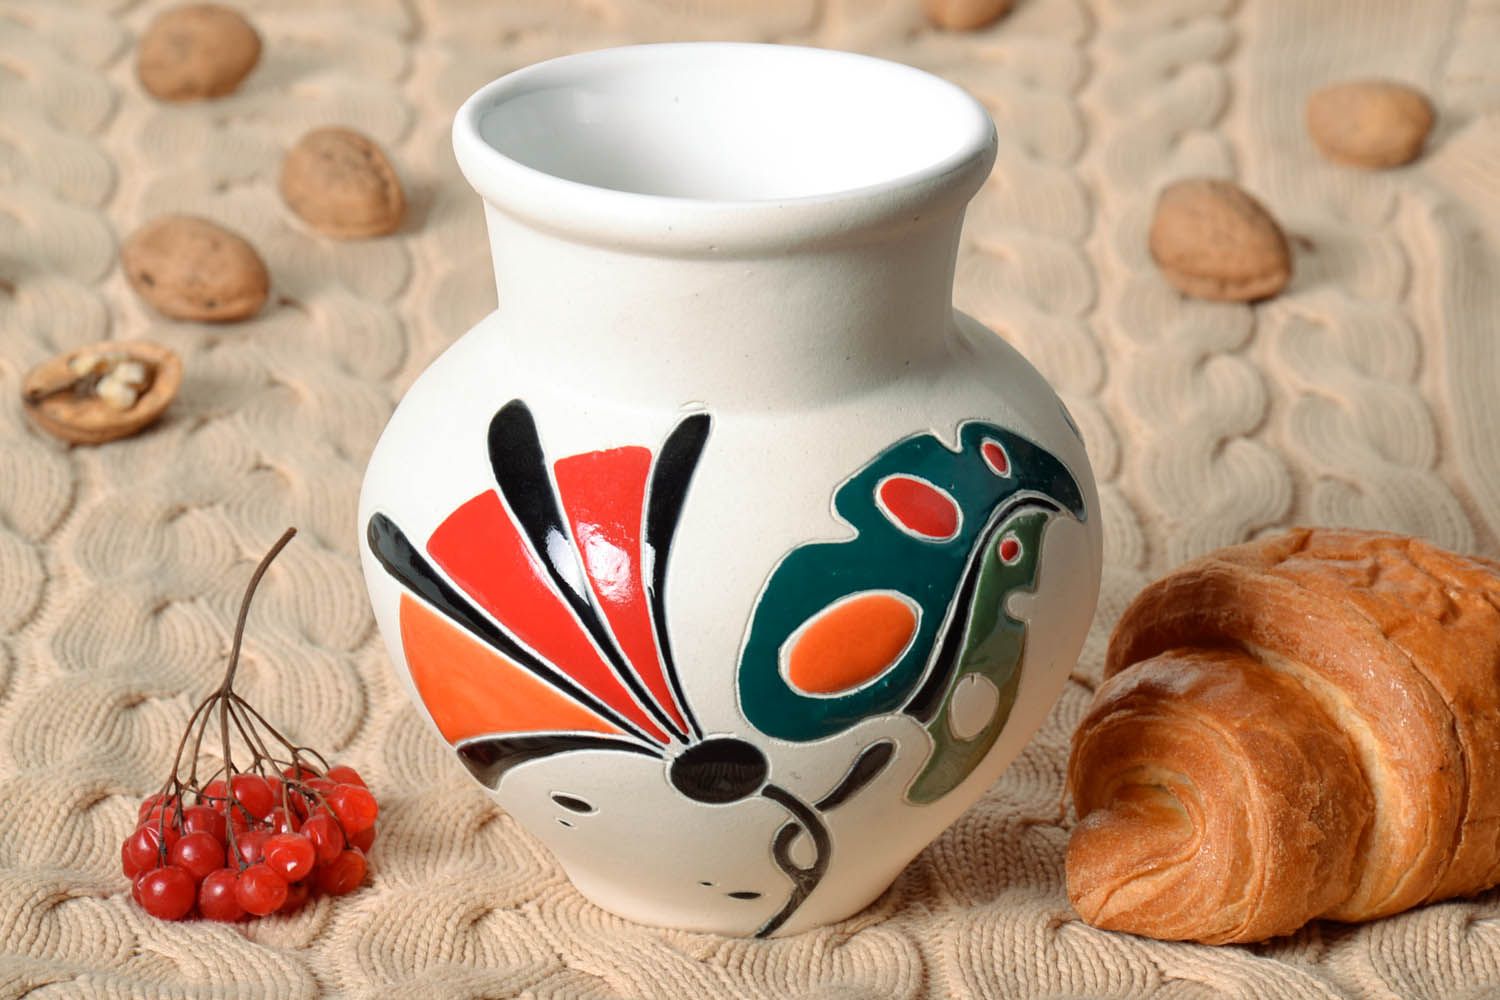 30 oz ceramic white hand-painted milk pitcher in Japanese style 2 lb photo 1